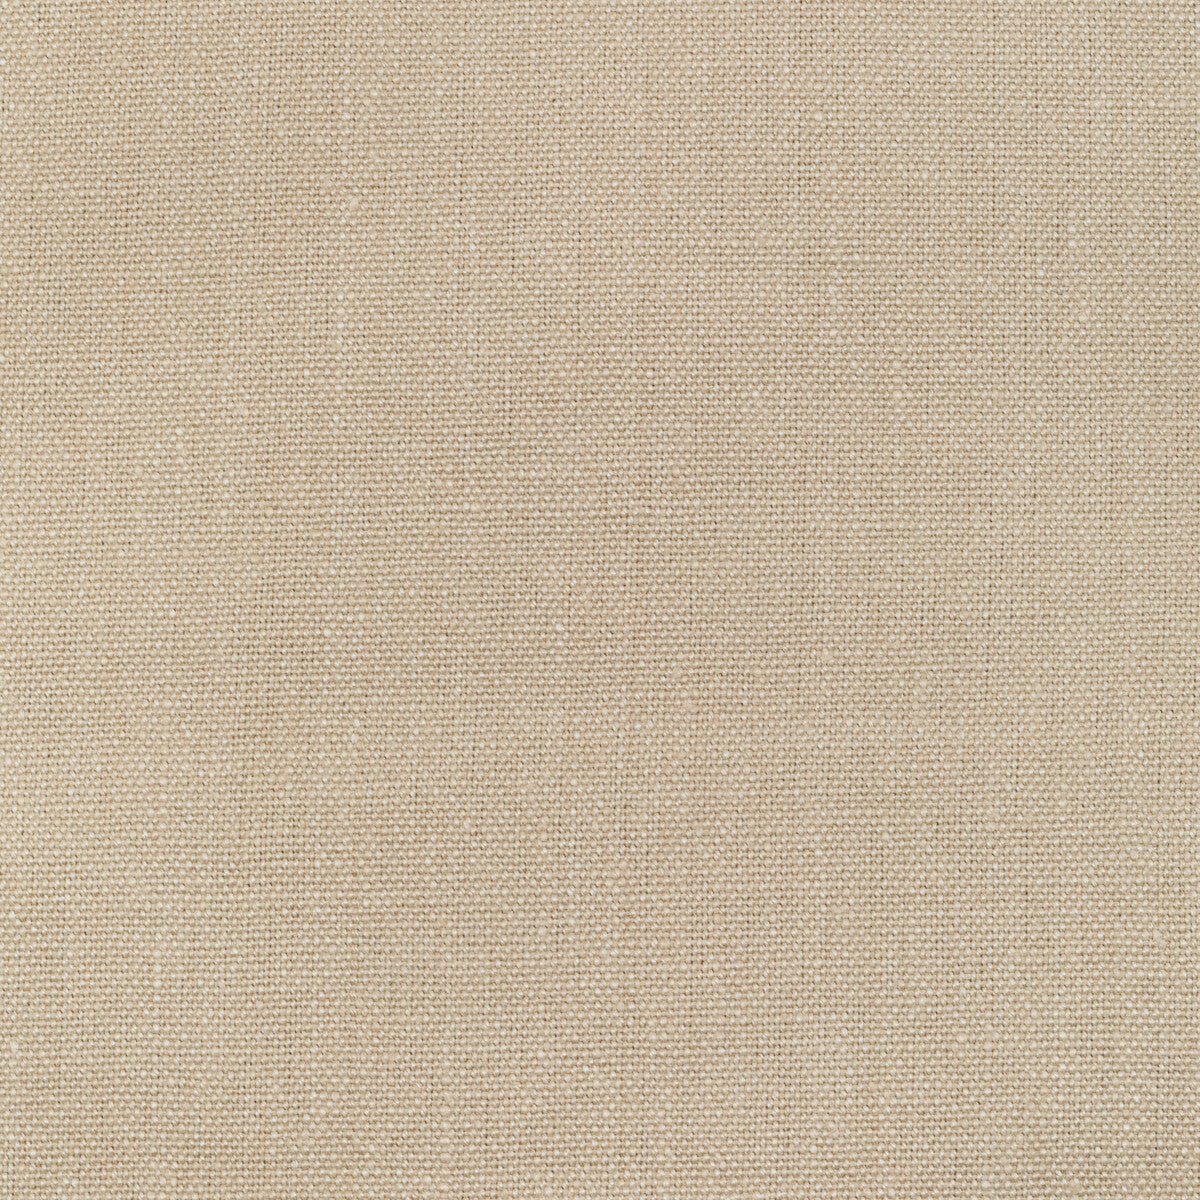 Watermill fabric in oatmeal color - pattern 30421.106.0 - by Kravet Basics in the Perfect Plains collection